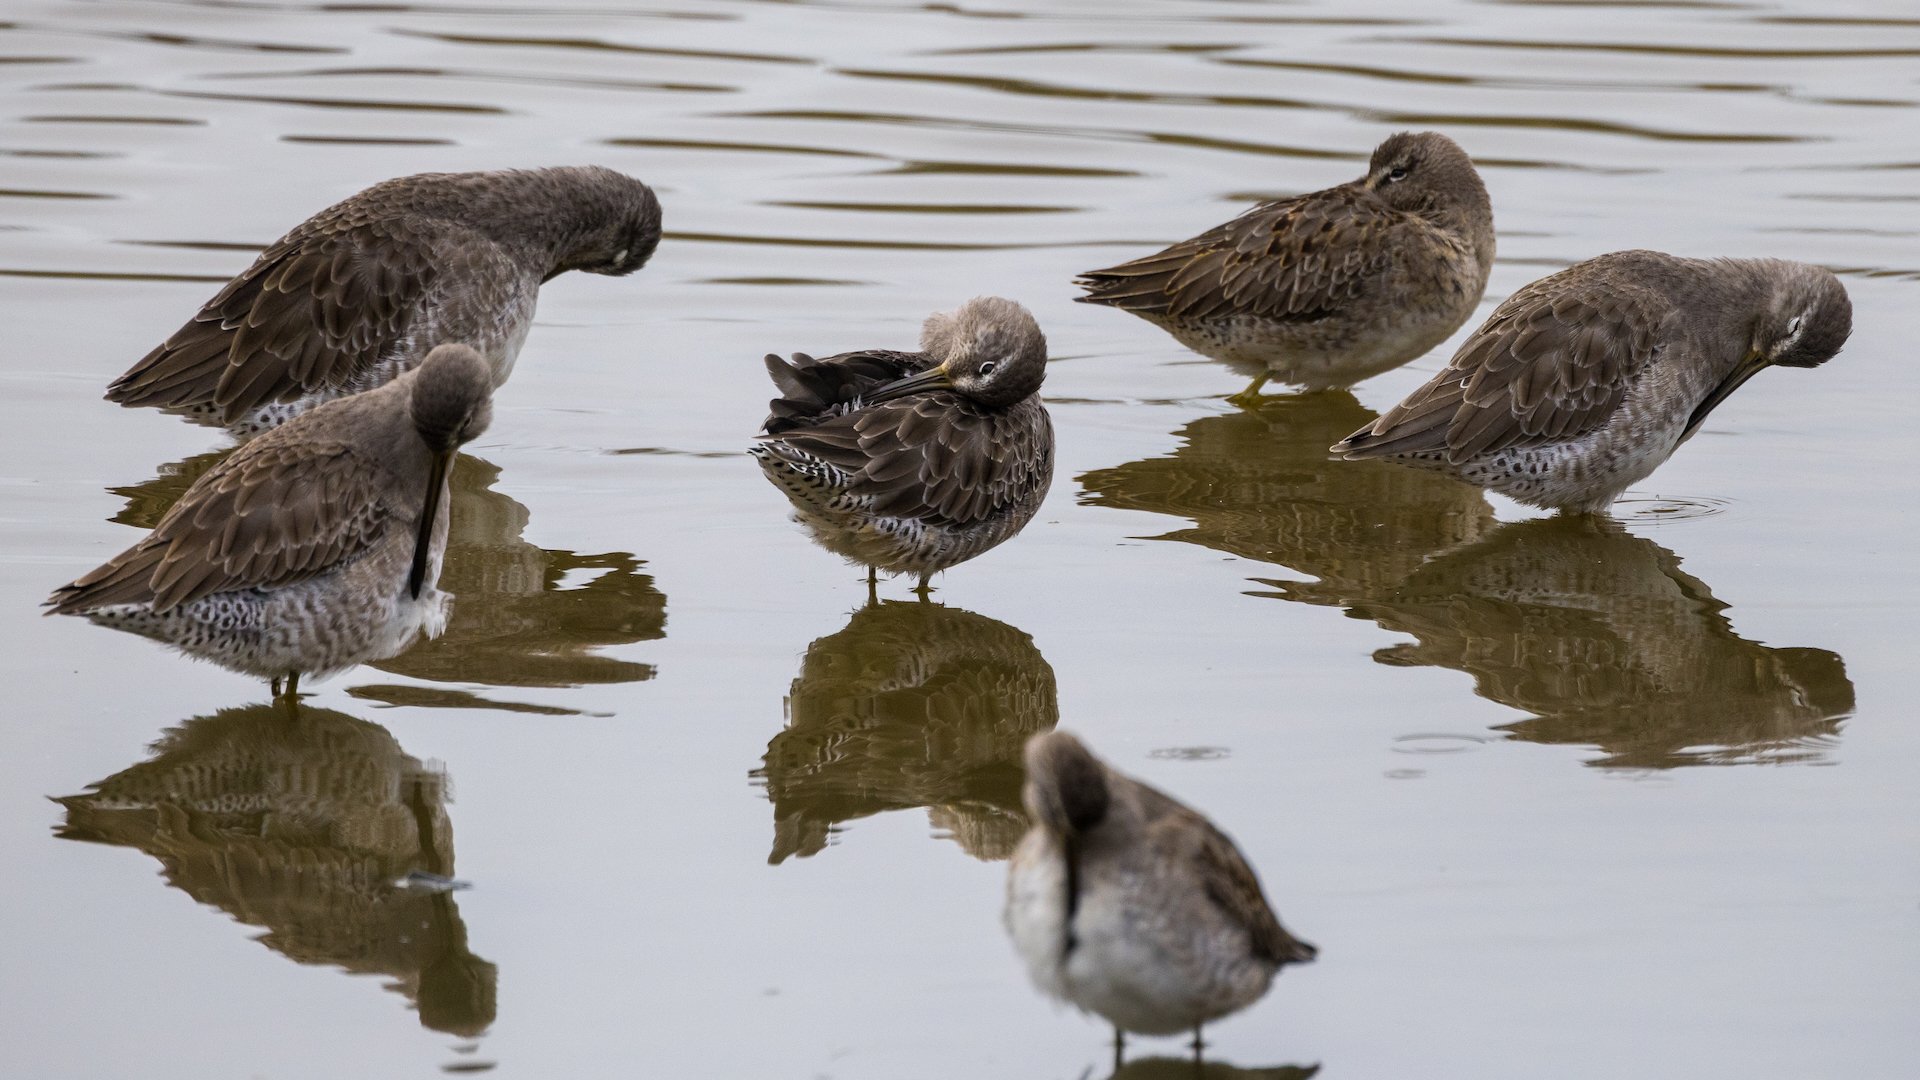  There was a big flock sandpipers - they are tough to ID, but I think they are short-billed dowitchers.  